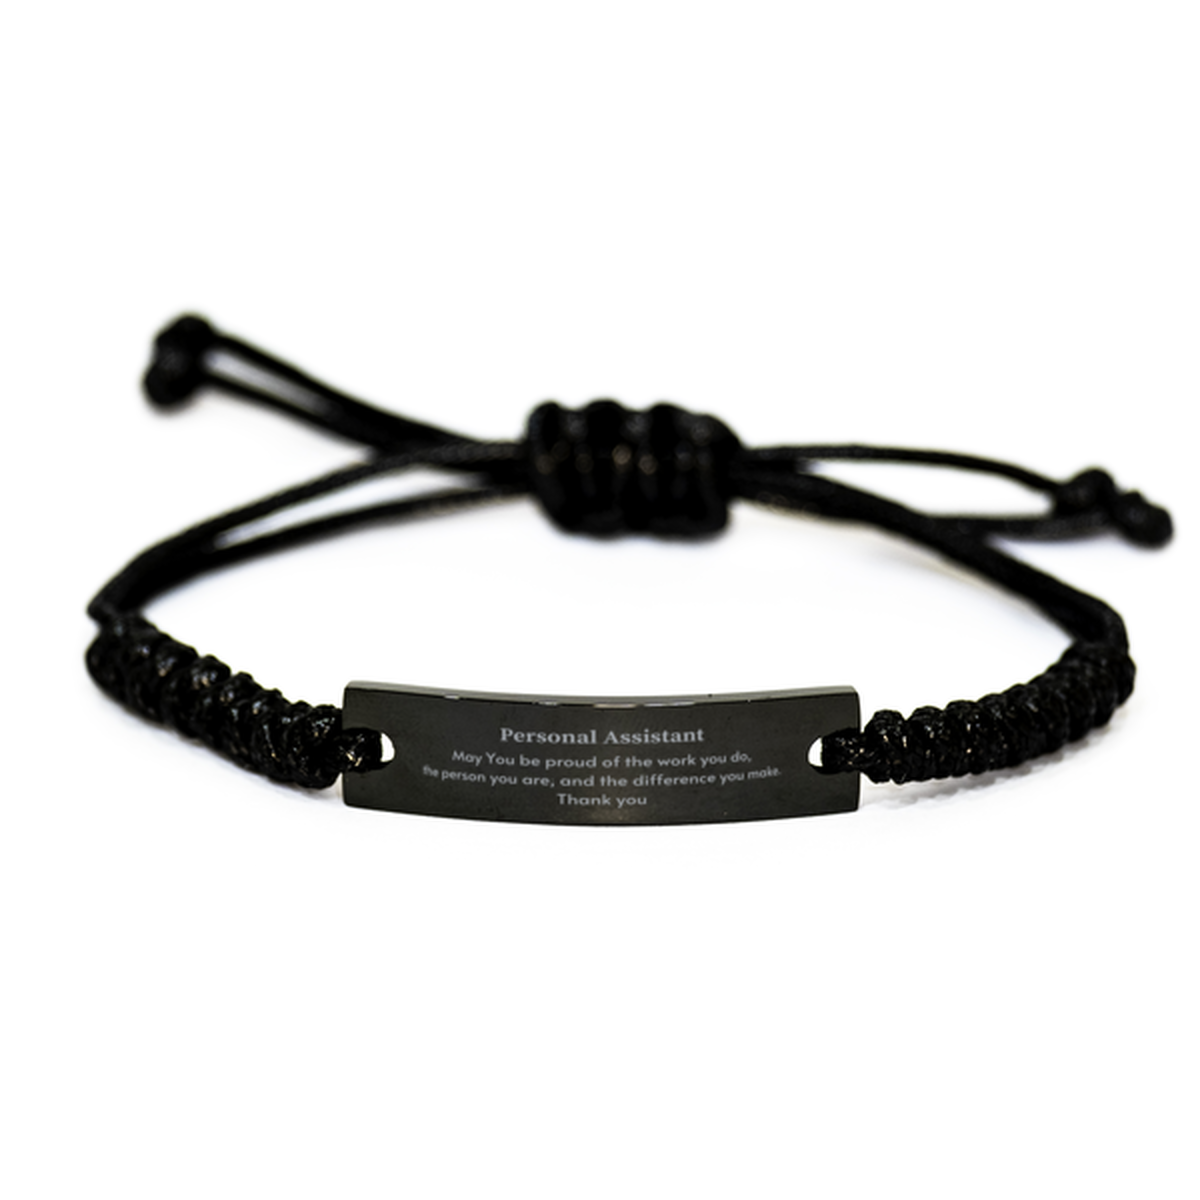 Heartwarming Black Rope Bracelet Retirement Coworkers Gifts for Personal Assistant, Personal Assistant May You be proud of the work you do, the person you are Gifts for Boss Men Women Friends